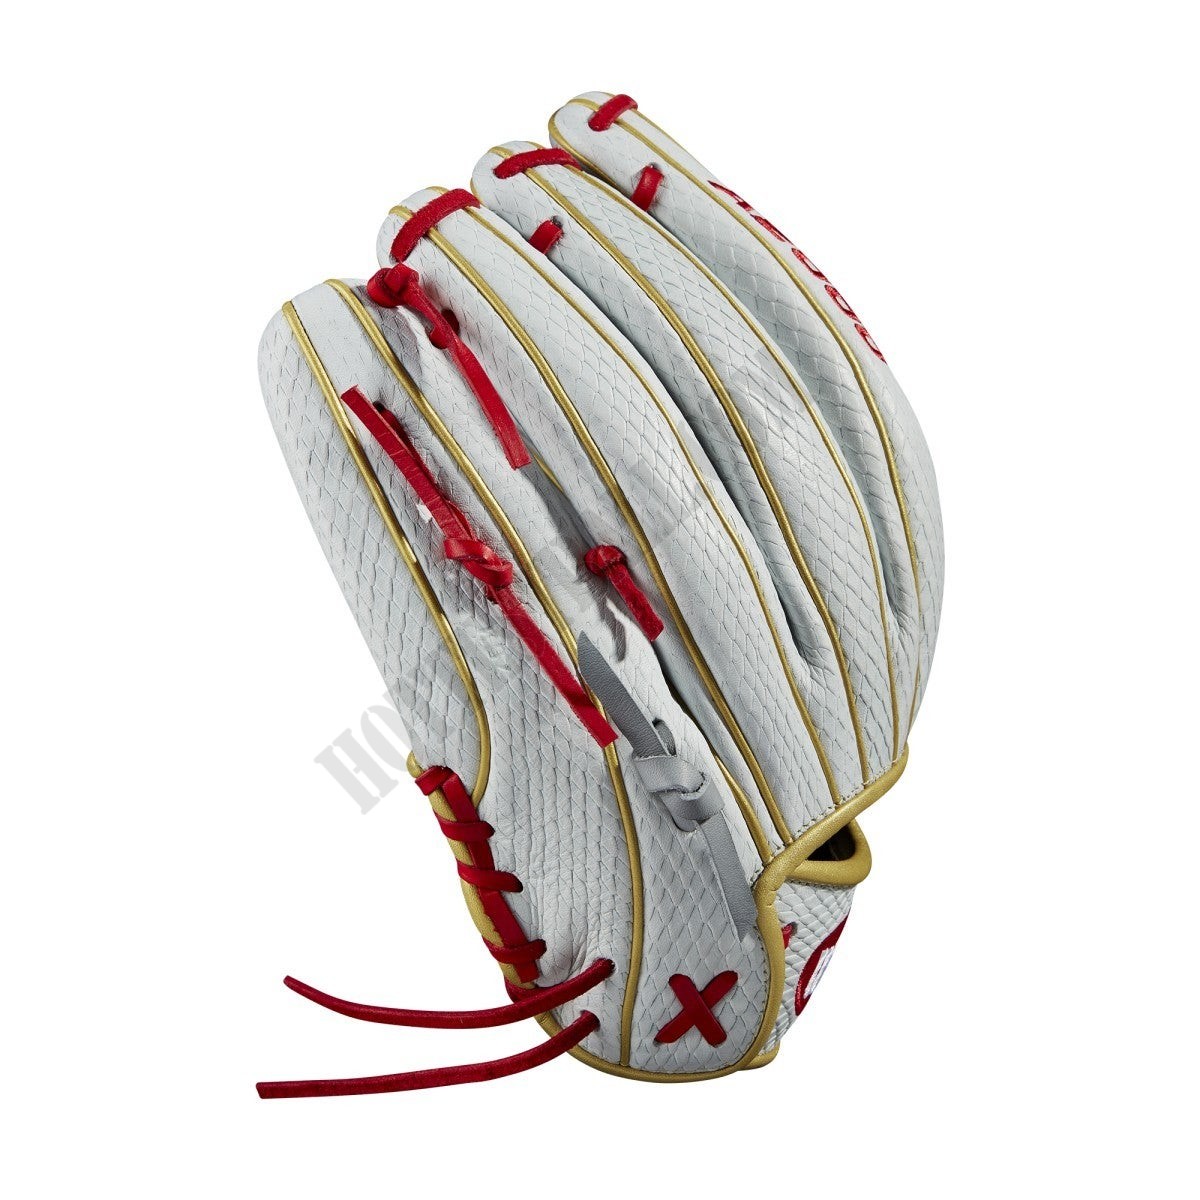 2020 A2000 12" KS7 GM Infield Fastpitch Glove ● Wilson Promotions - -8